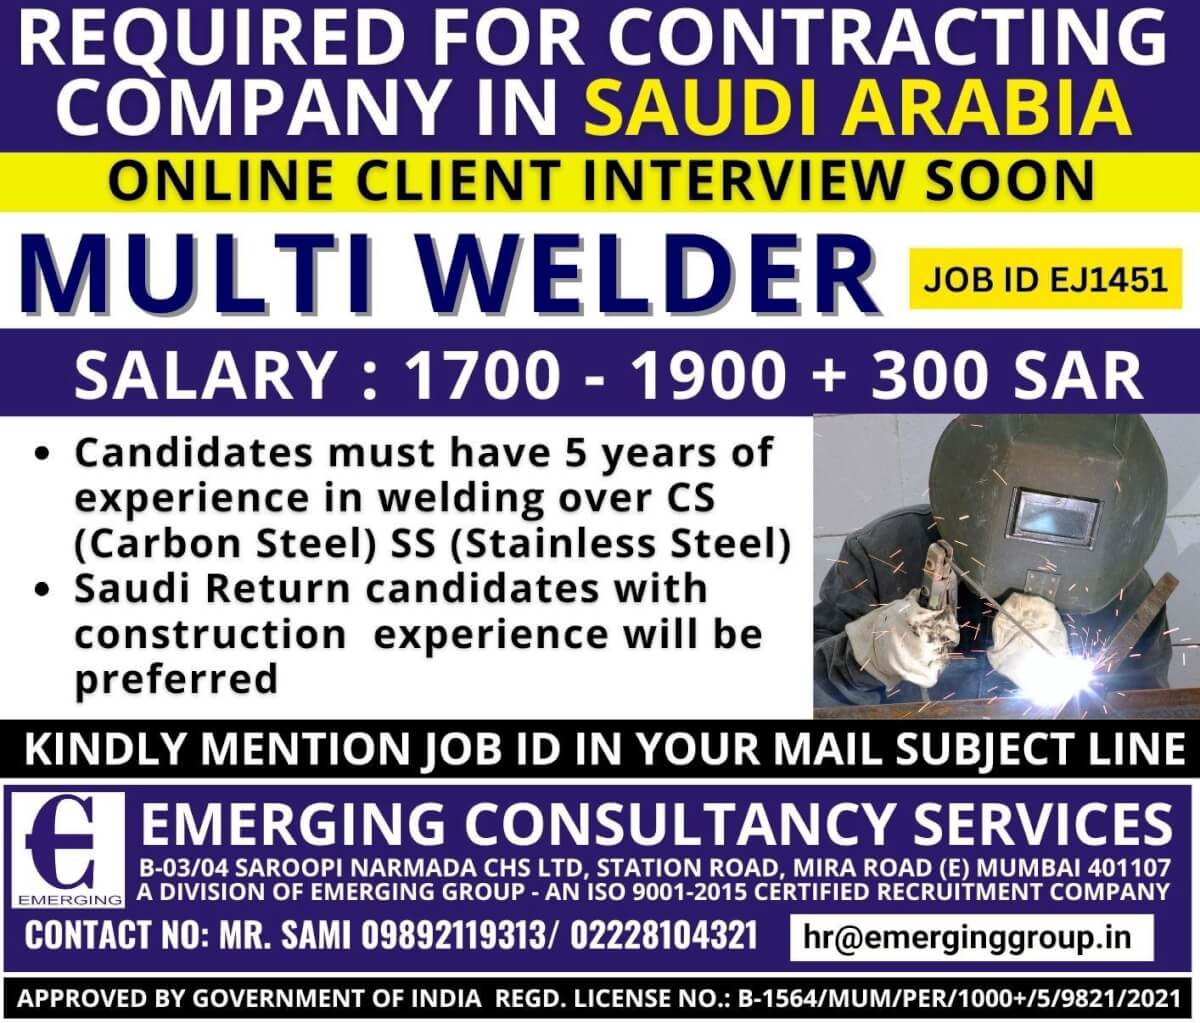 URGENTLY REQUIRED CONTRACTING COMPANY IN SAUDI ARABIA - CLIENT INTERVIEW SOON